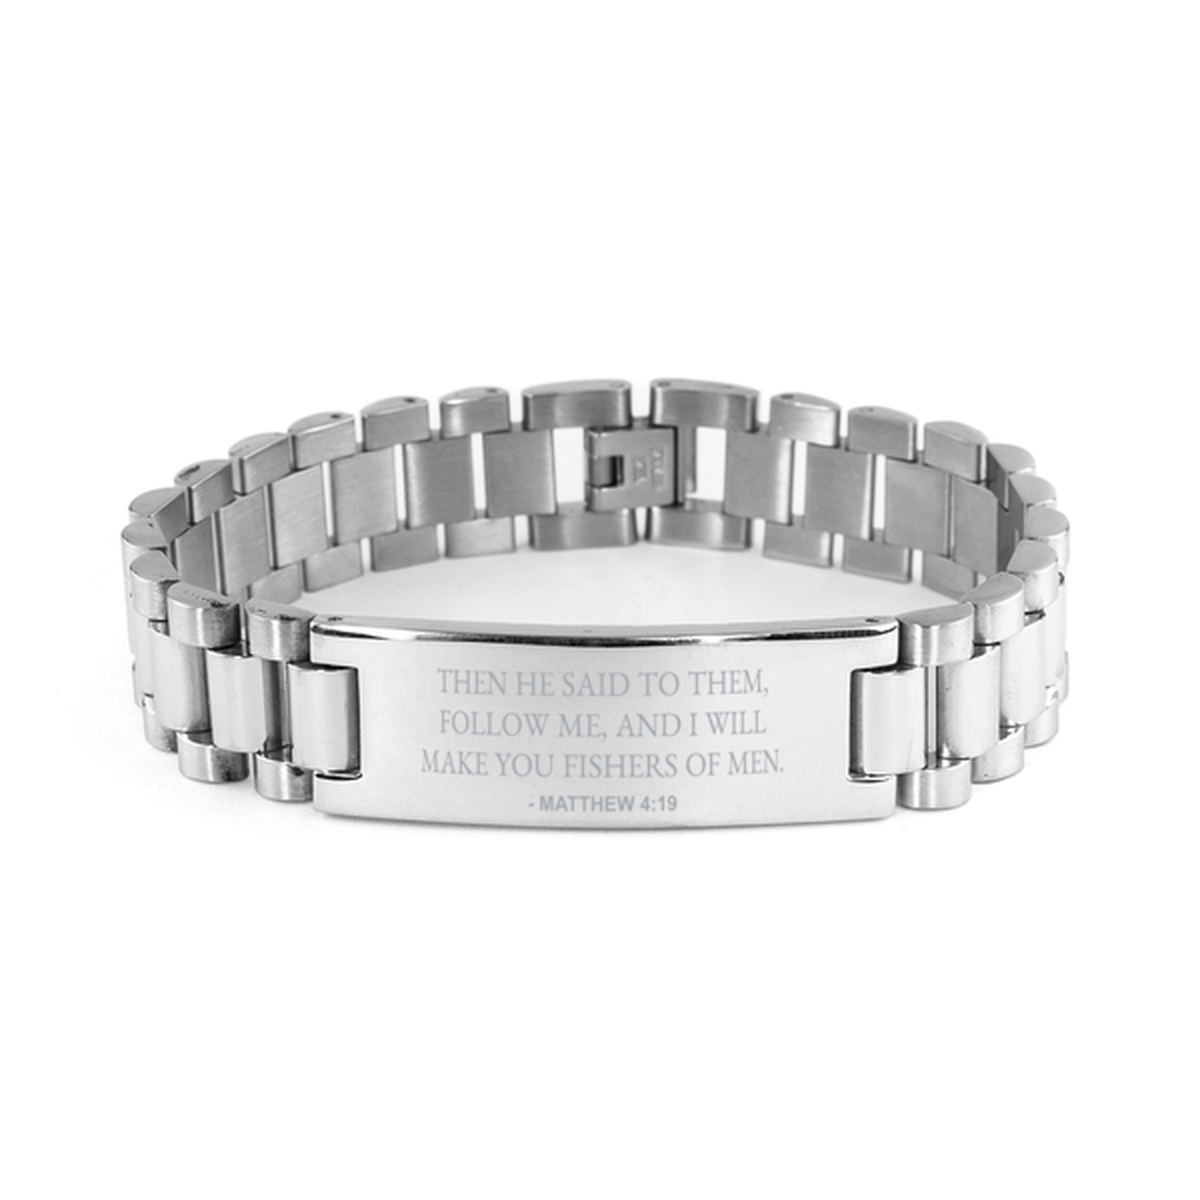 Christian Ladder Stainless Steel Bracelet, Matthew 4:19 Then He Said To Them, Follow Me, And I Will Make, Motivational Bible Verse Gifts For Men Women